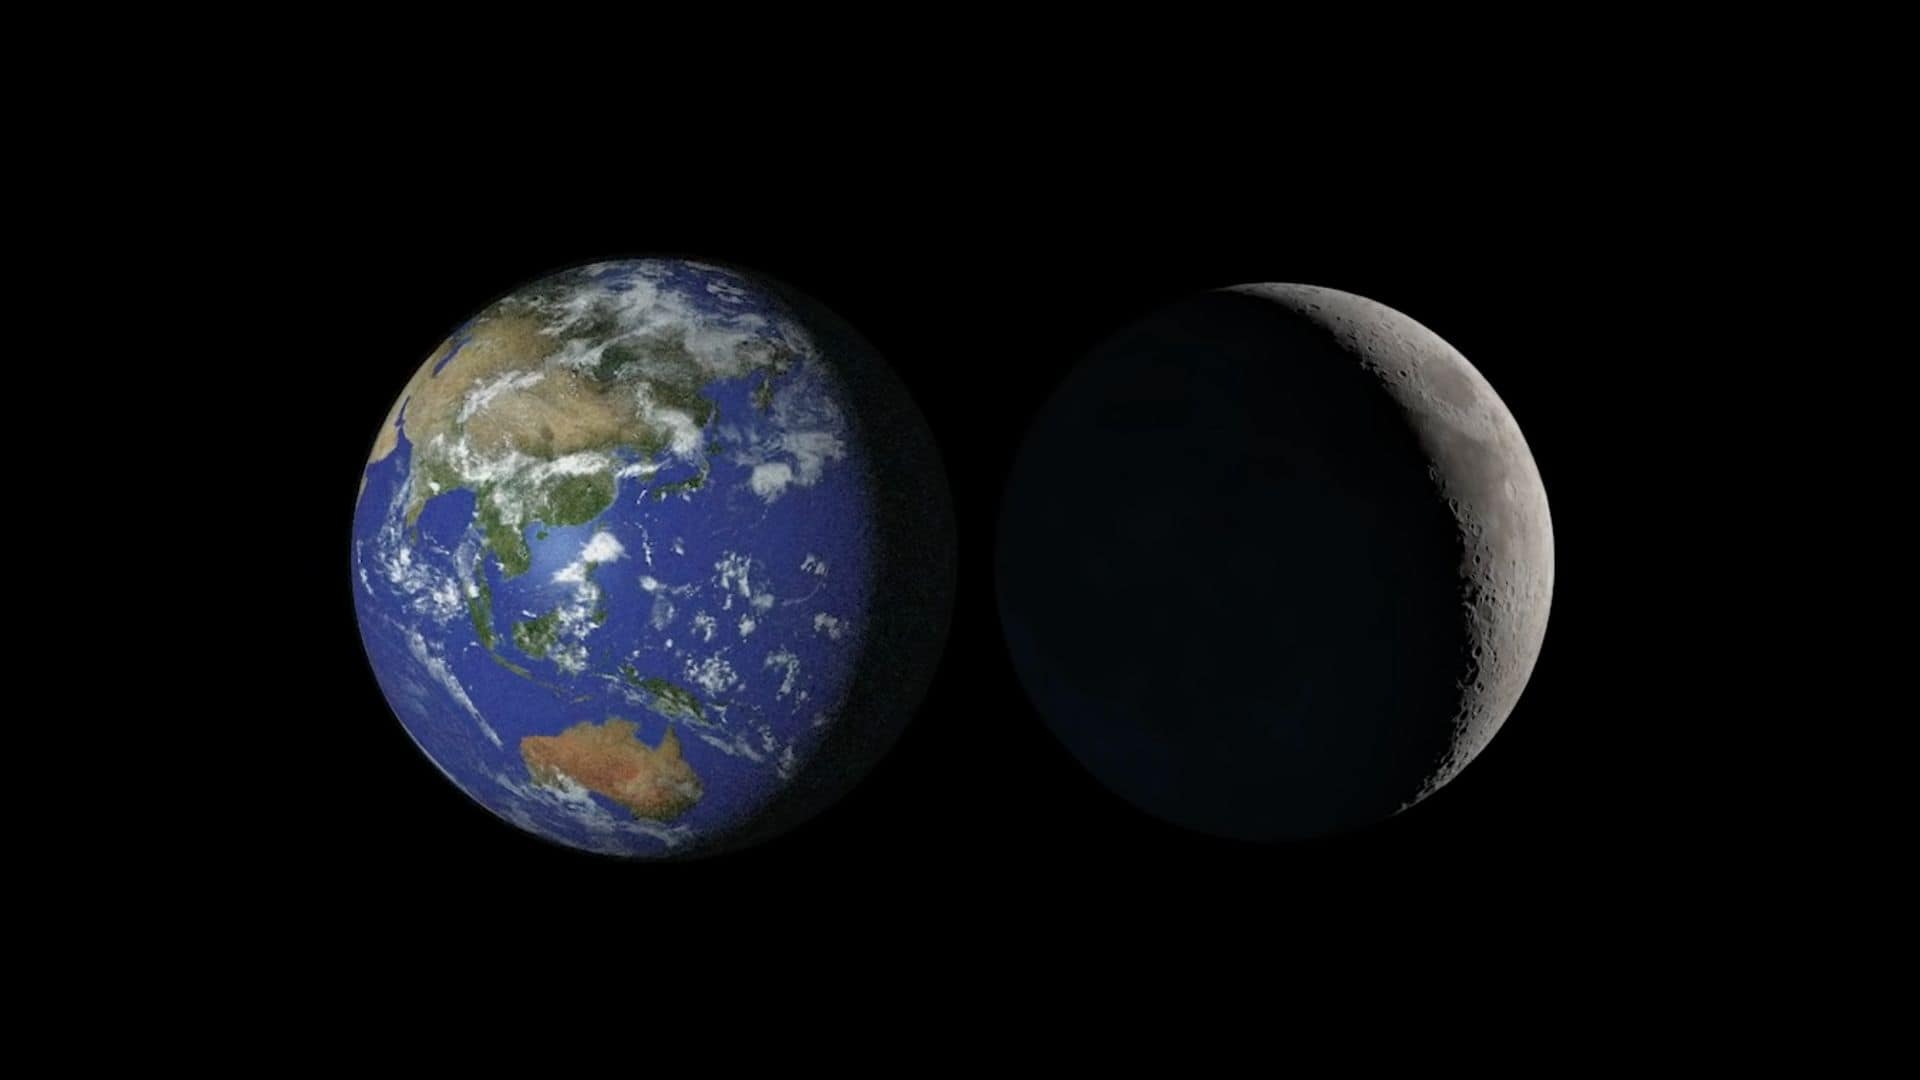 During Earthshine, the earth looks nearly full from the moon when the moon looks slim crescent from the Earth